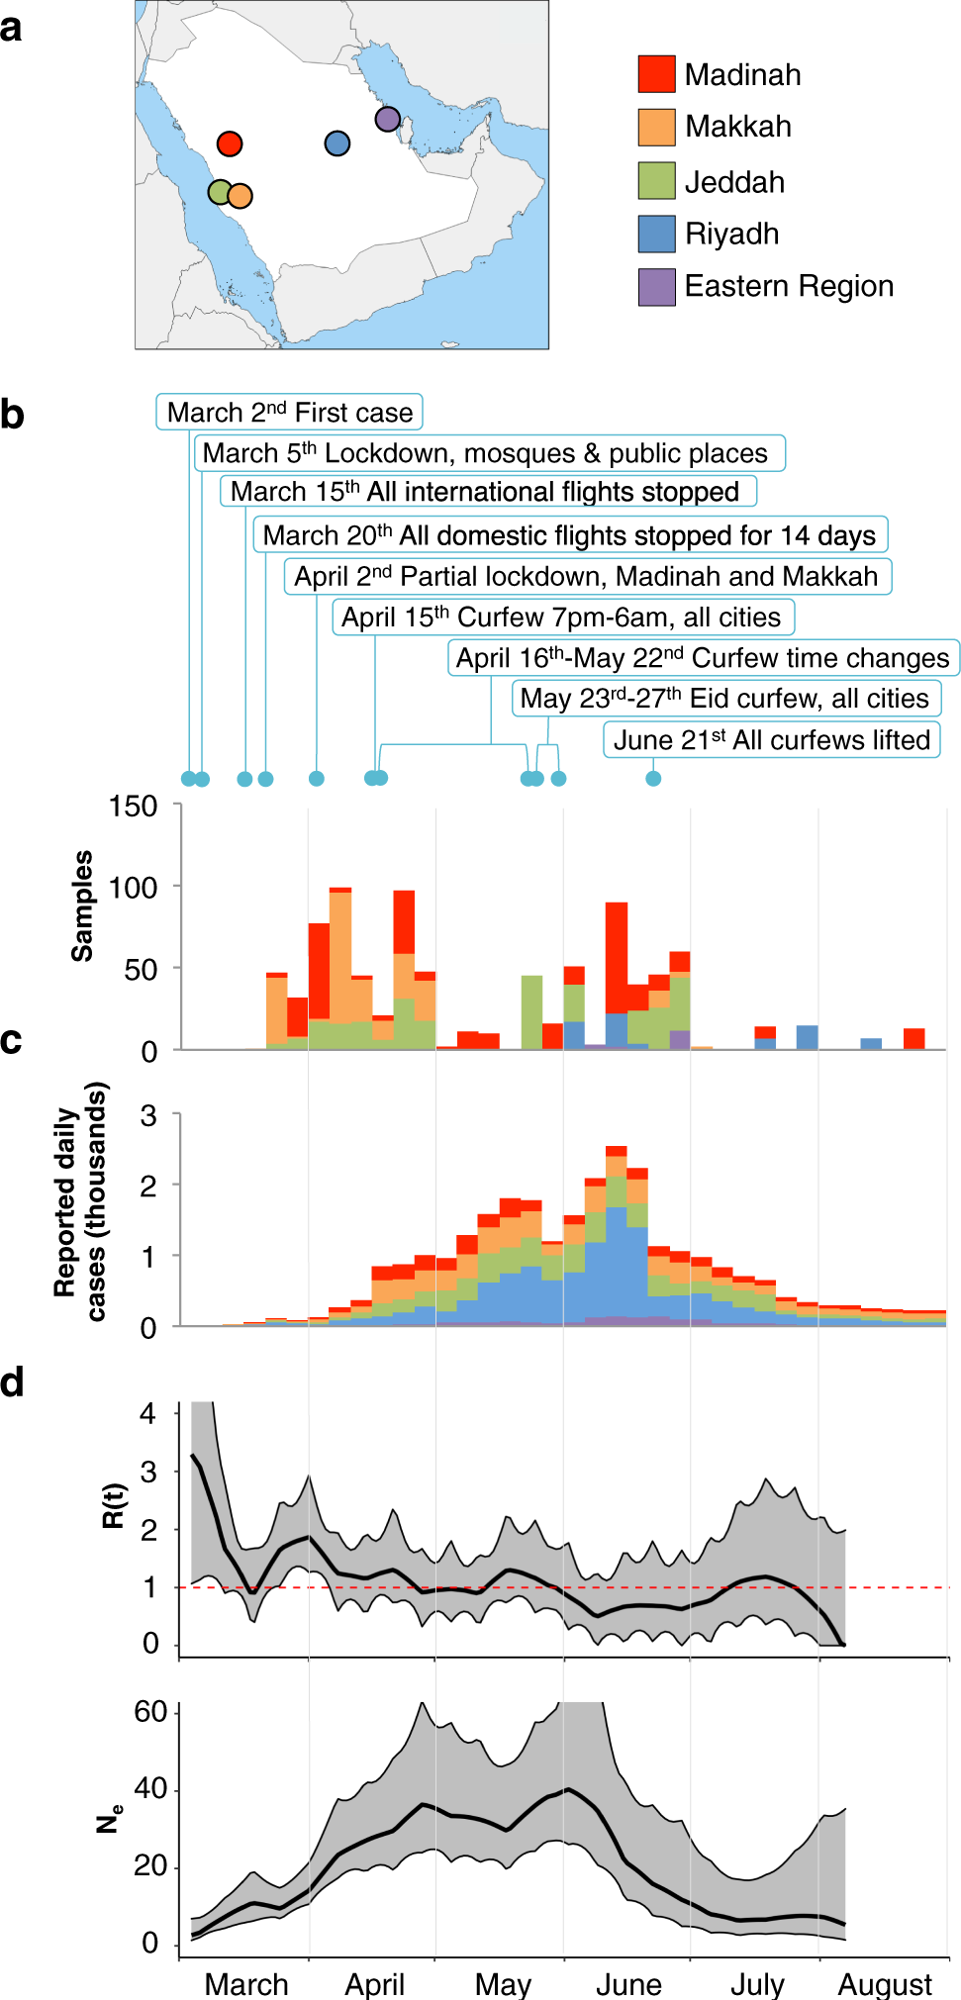 a Locations of the sampling cities within Saudi Arabia. b Stacked bars showing the numbers of samples retrieved from the 4 cities and the Eastern region during the first six months of the pandemic. Cities are colored as in panel a. Months are shown at the bottom of the figure, and each month is divided into 5-day intervals. New daily cases for the city of Khobar are shown on the Eastern Region plot. Major restrictions imposed by the Ministry of Health and by Royal decrees are indicated above plots. c Stacked bars showing the average numbers of new daily cases in sampling cities (Supplementary Note 1). d Estimate of effective reproduction number [Rt] over time in Saudi Arabia (top) and the estimate of effective population size [Ne], the relative population size required to produce the diversity seen in the sample (bottom). Central black lines show median estimates, and gray confidence areas denote the 95% credible intervals. The red horizontal red line represents an R of 1, the level required to sustain epidemic growth.